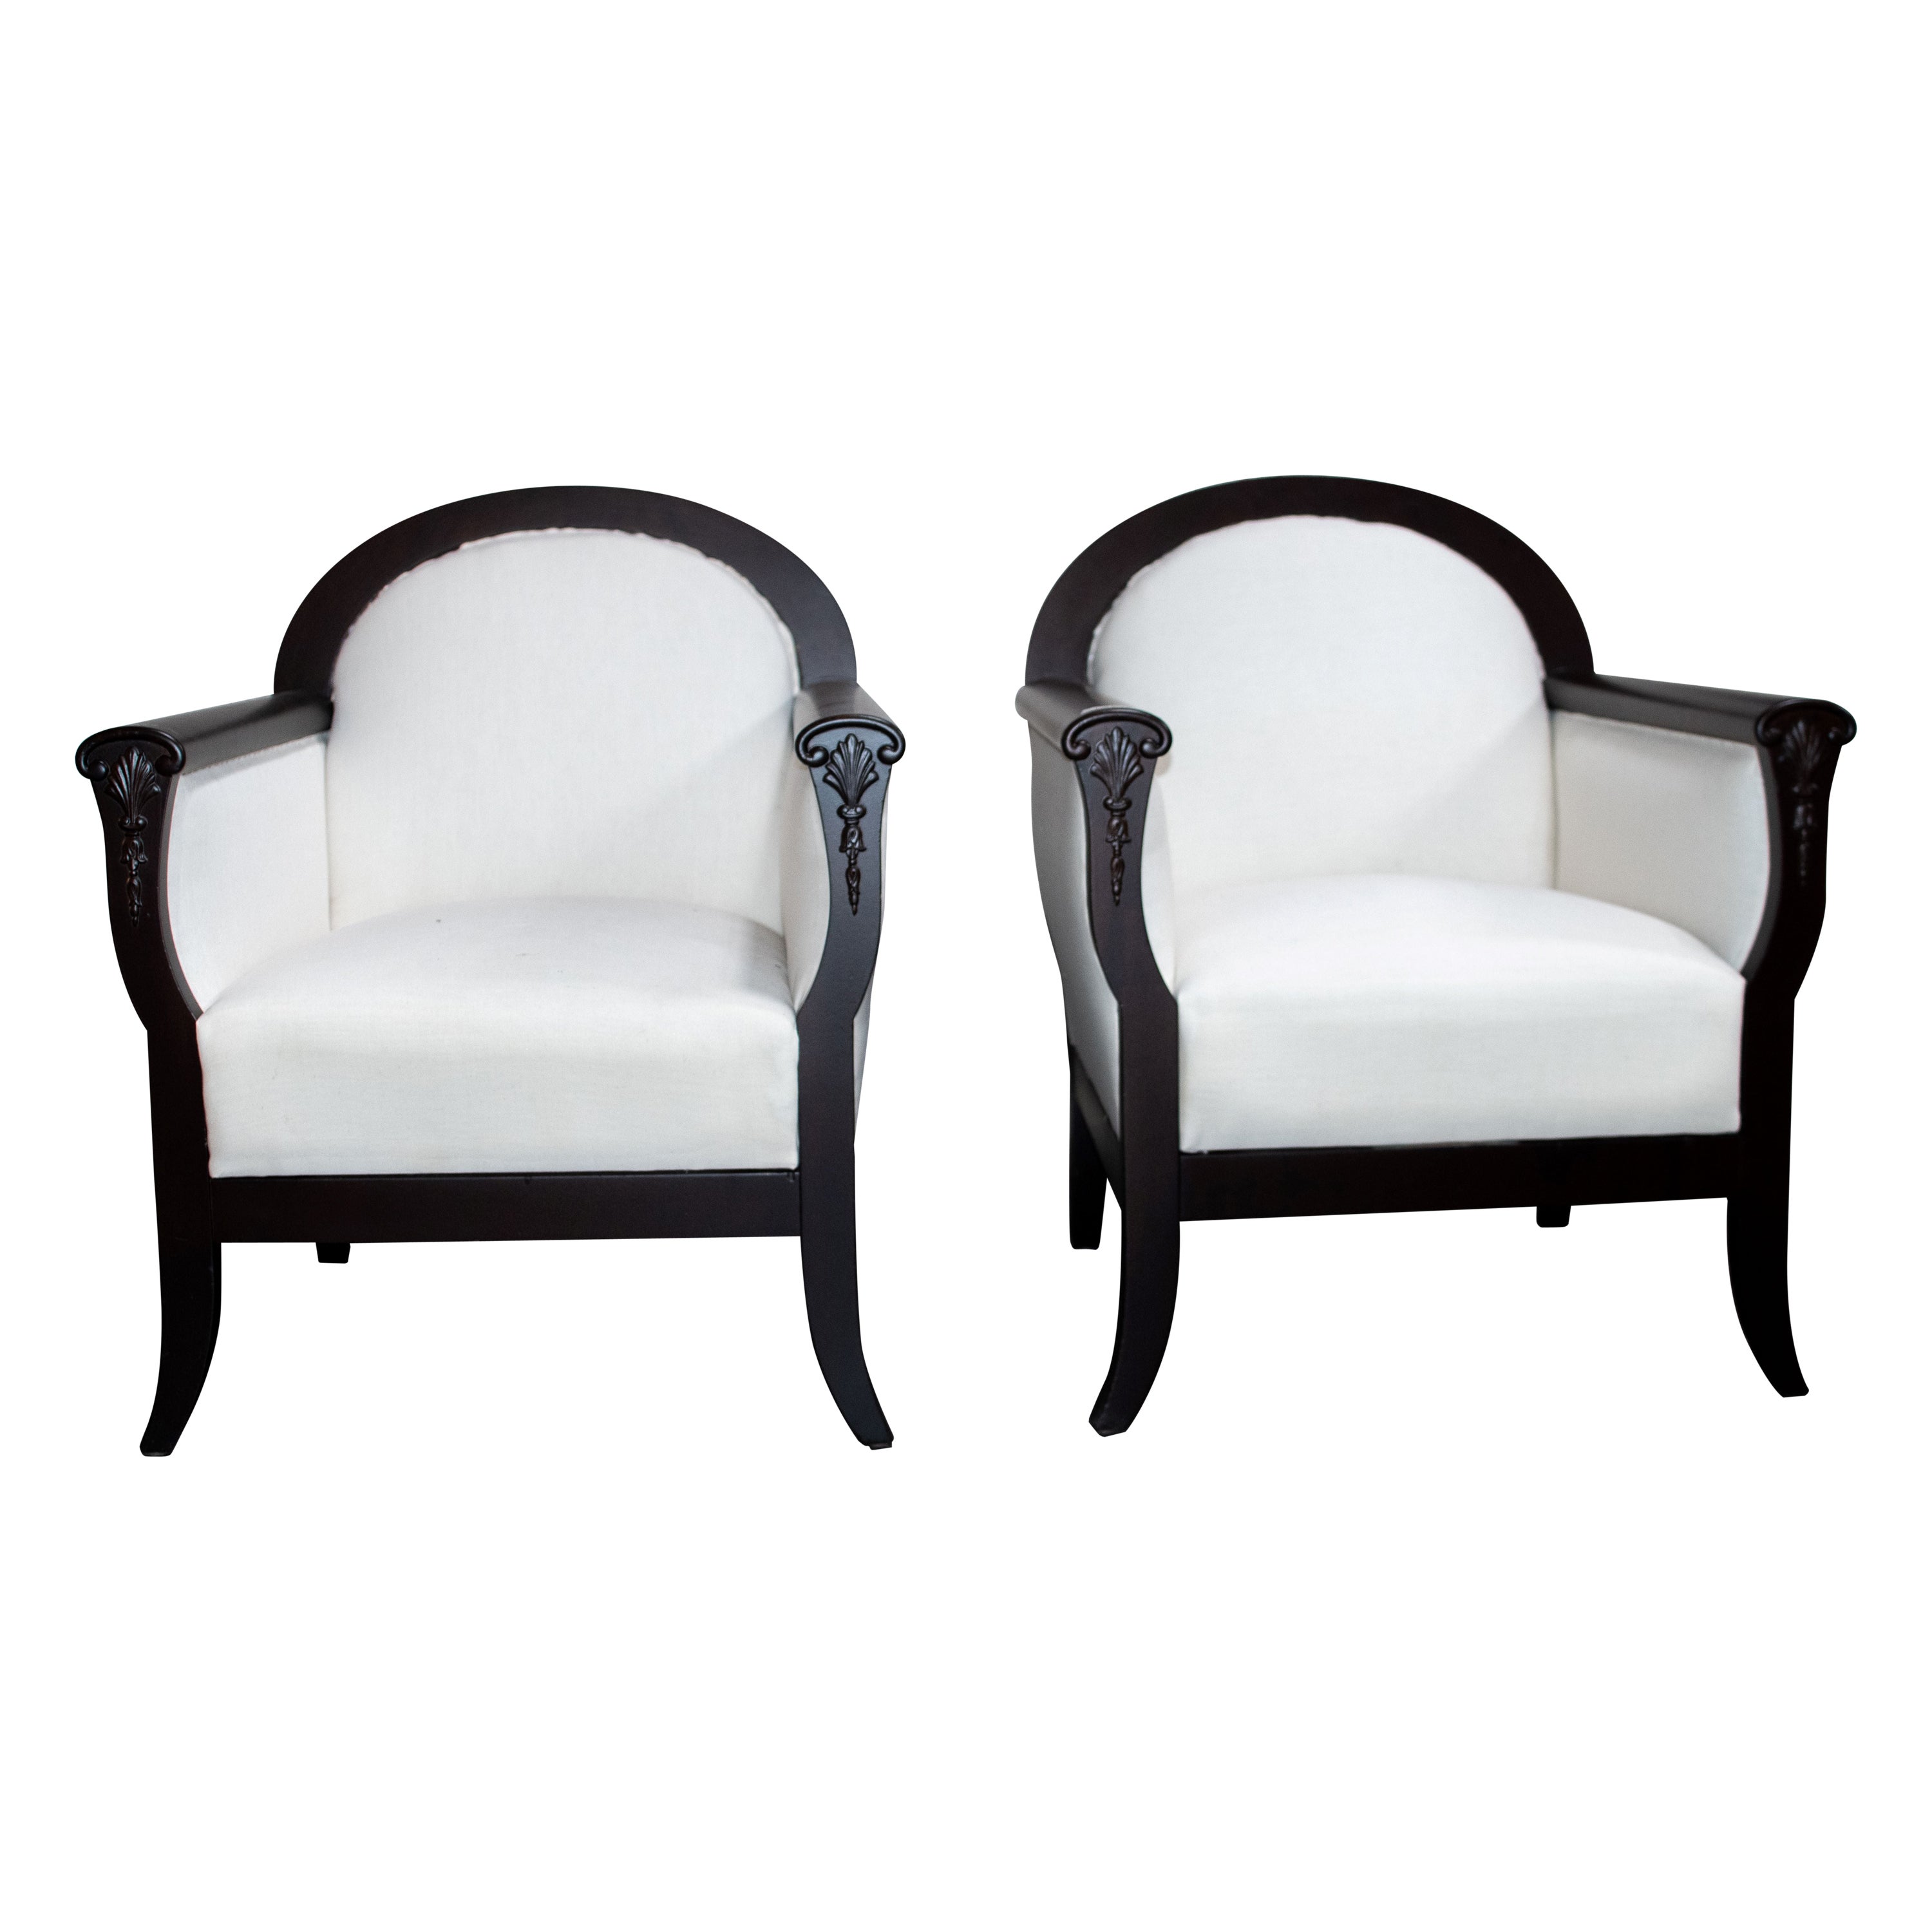 Pair of Neoclassical Revival Lounge Chairs - COM Ready For Sale